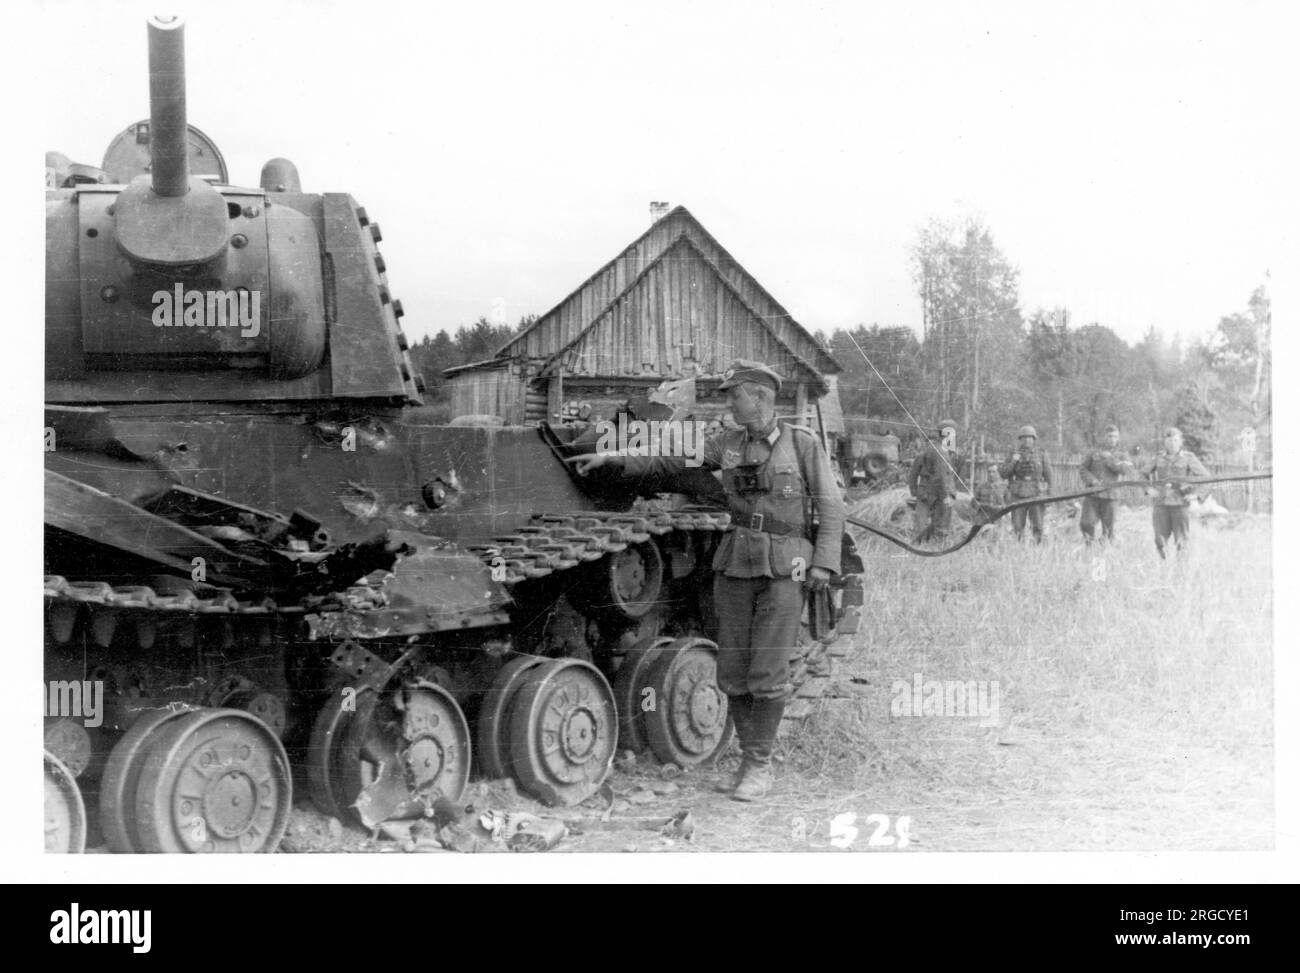 A Soviet 'KV-1 Shielded' heavy tank, knocked out by German anti-tank fire, with damaged indicated by an invading German soldier. The 'KV-1 Shielded' was a standard KV-1 with additional armour riveted onto the turret and parts of the hull. The extra armour can be seen on the side of the turret. (The Kliment Voroshilov (KV) tanks are a series of Soviet heavy tanks named after the Soviet defence commissar and politician Kliment Voroshilov) Stock Photo